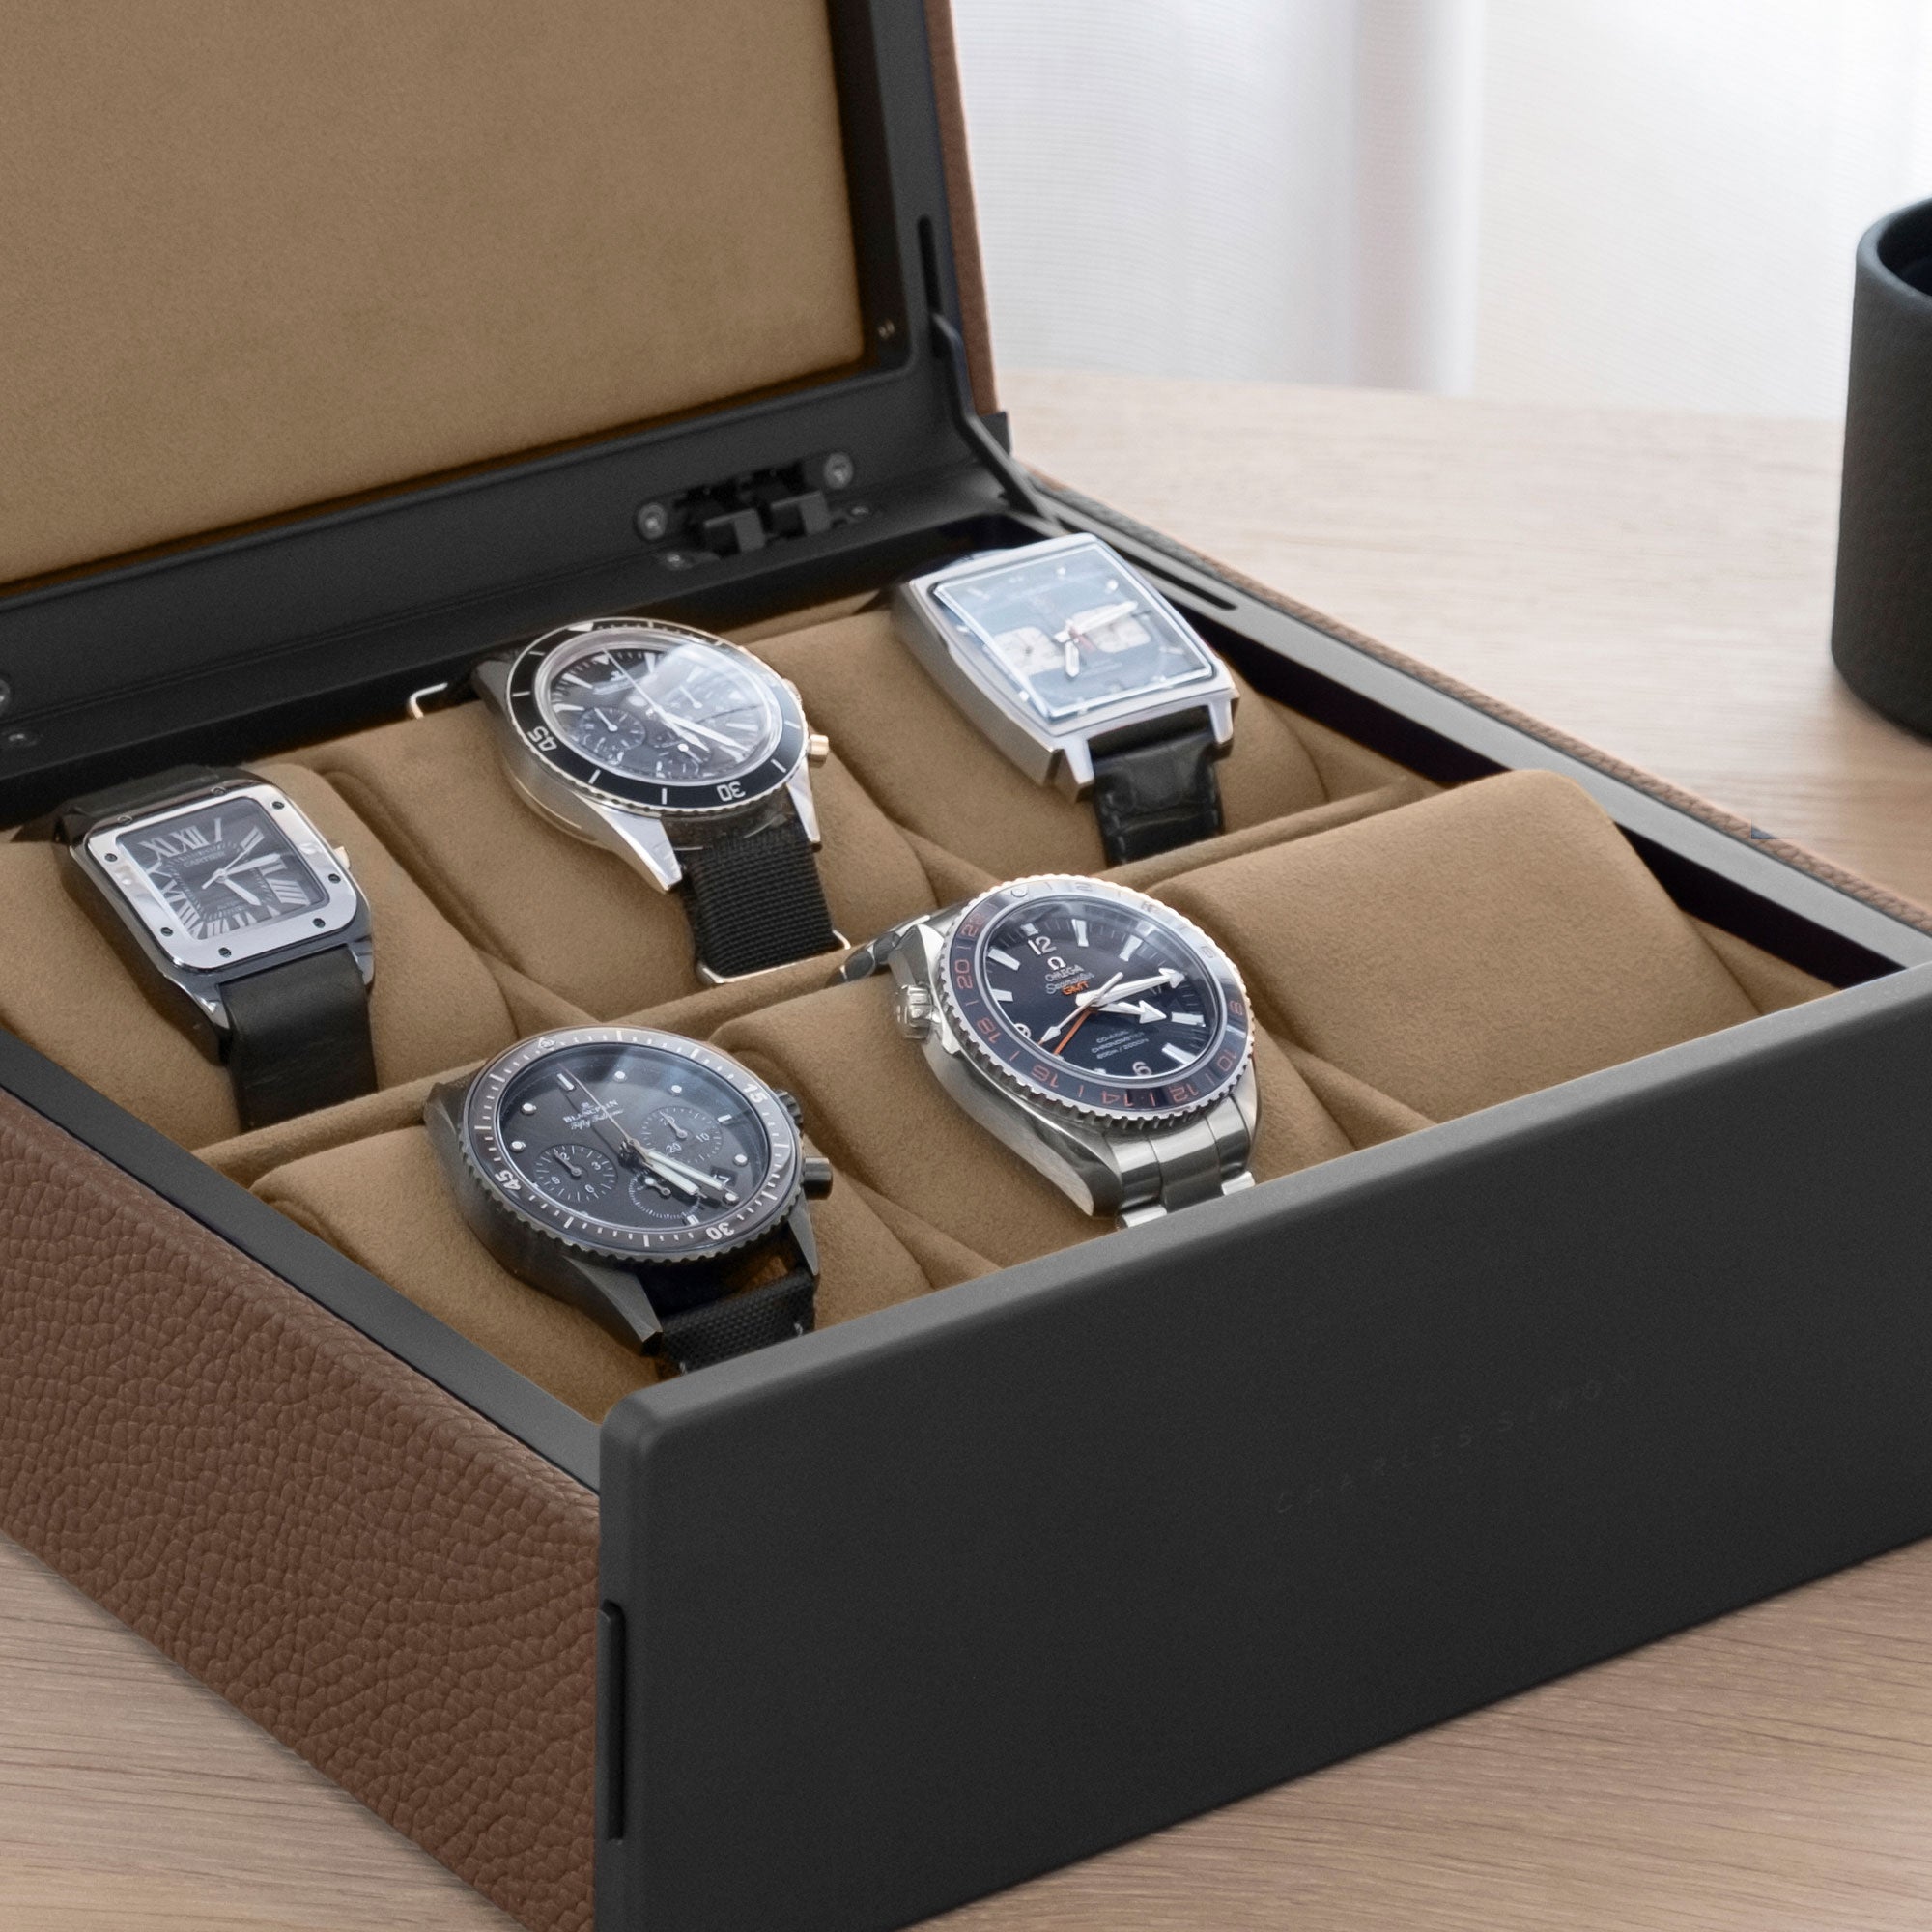 Lifestyle shot of Spence luxury watch box for 6 watches in tan leather filled with men's watches including Jaeger Lecoultre, Omega and Blancpain placed on removable camel Alcantara cushions